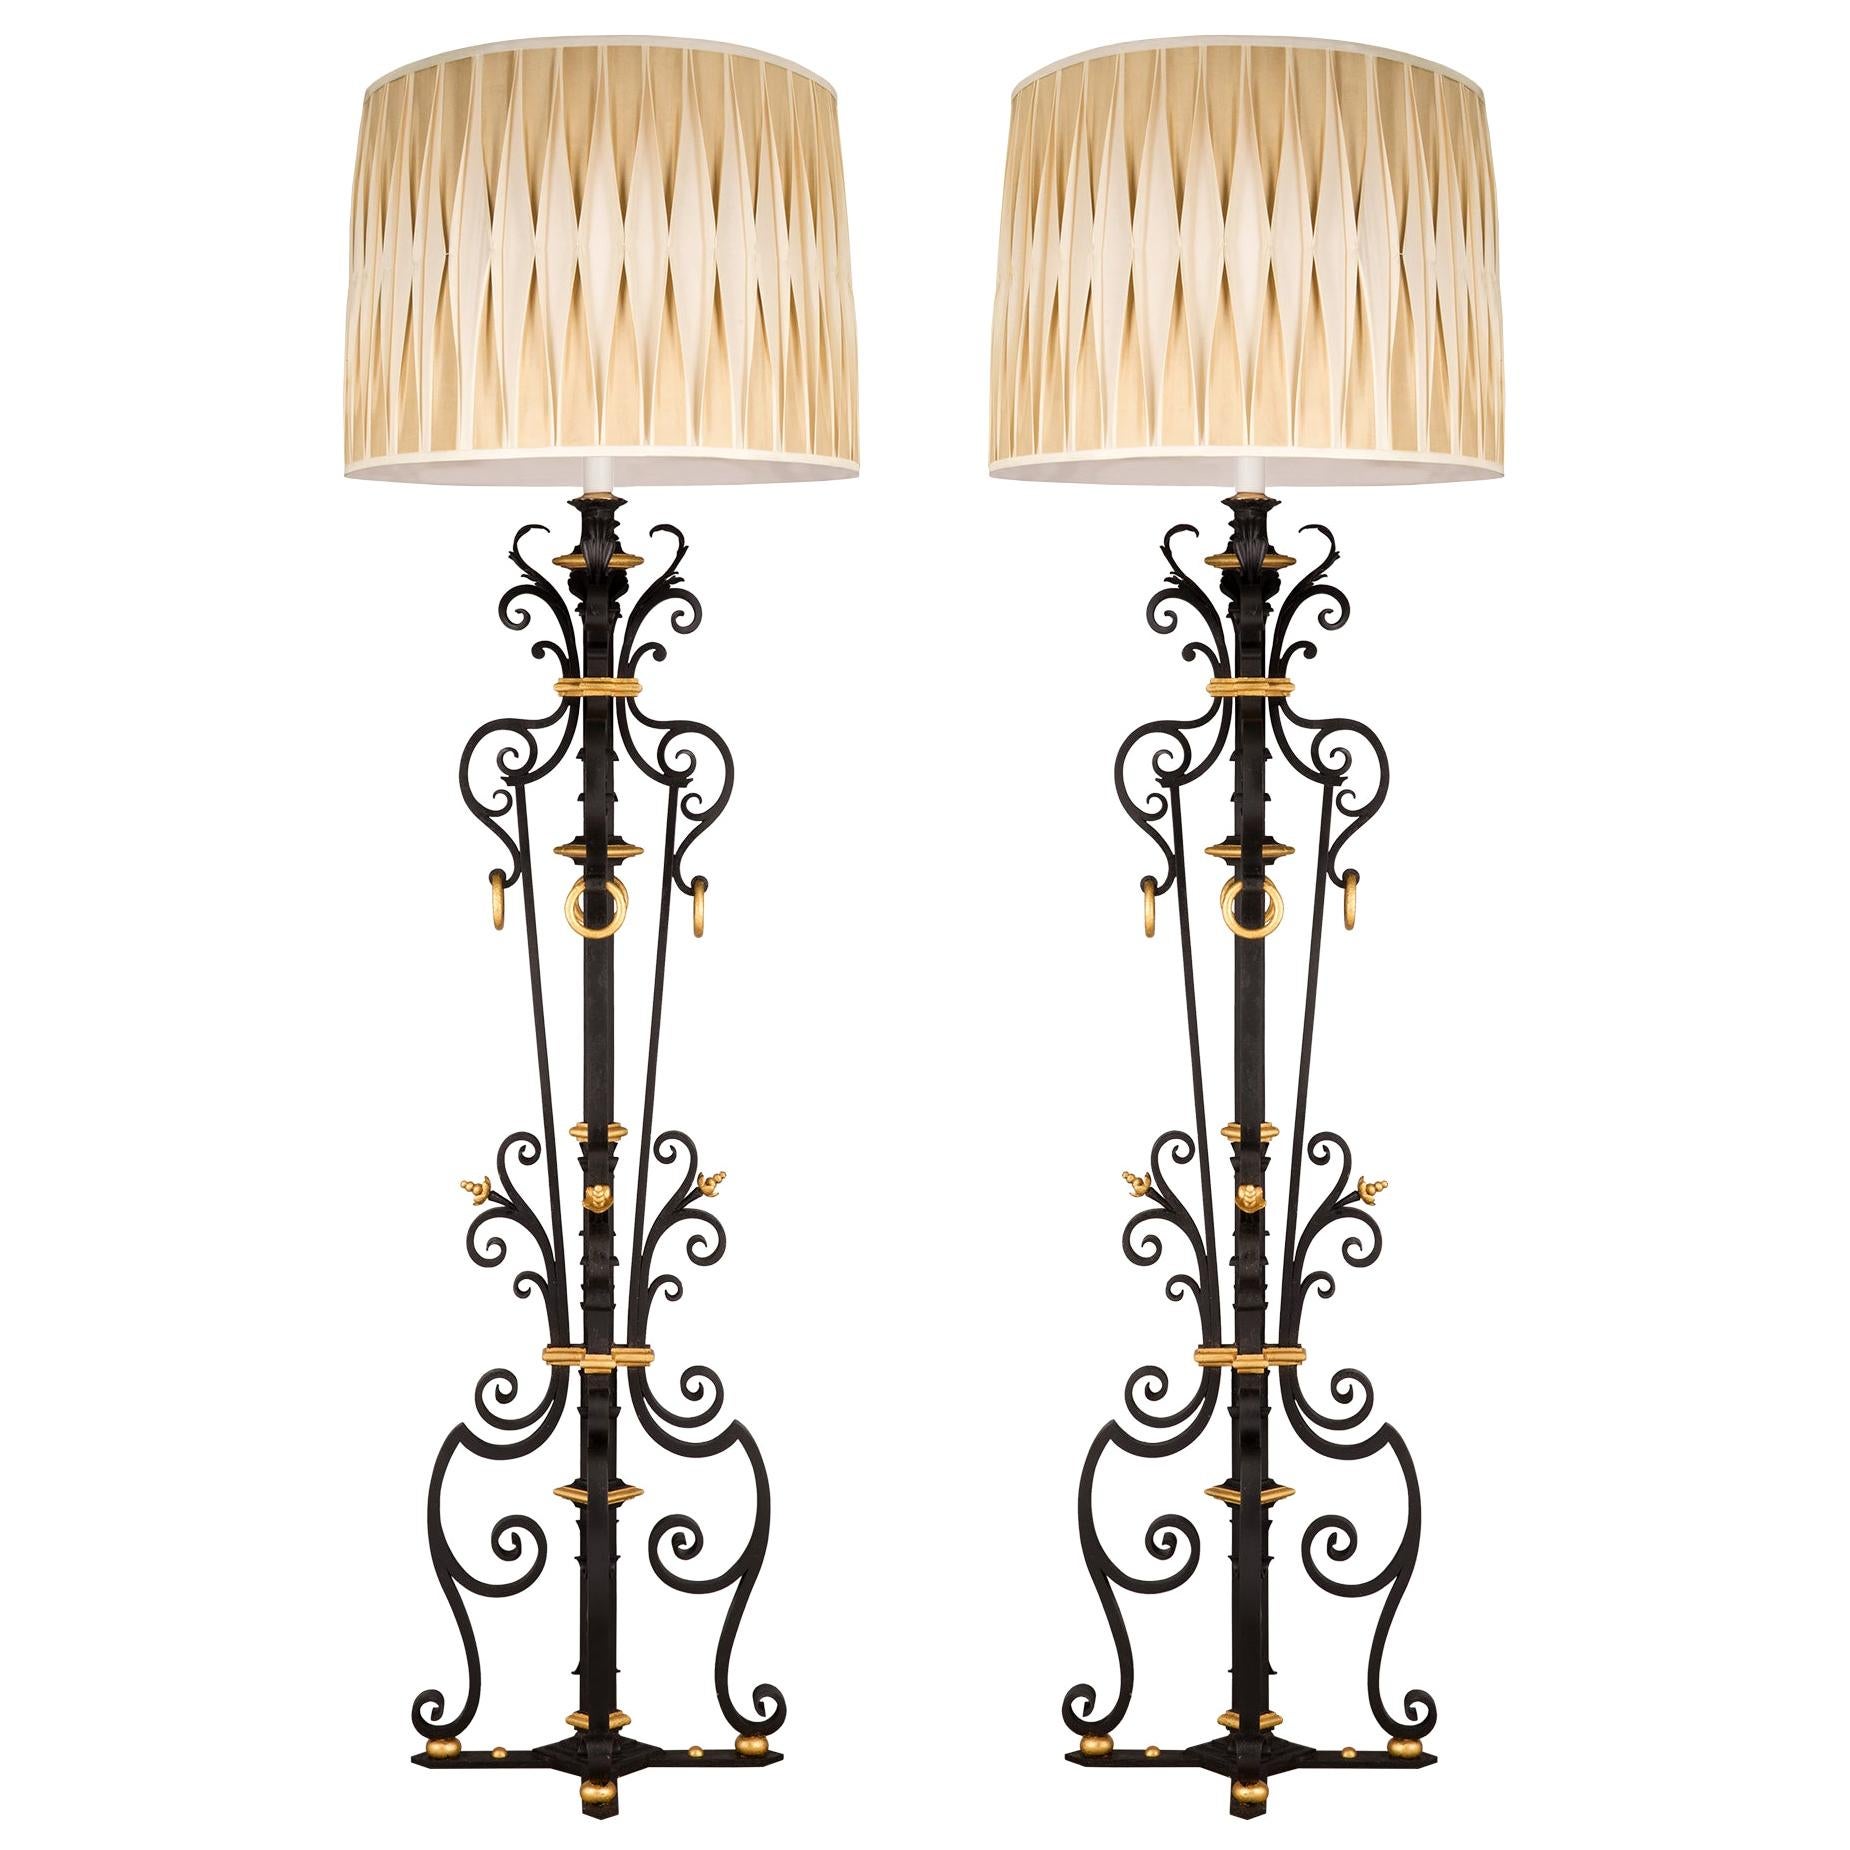 Pair of French 19th Century Charles X Style Ormolu and Wrought Iron Floor Lamps